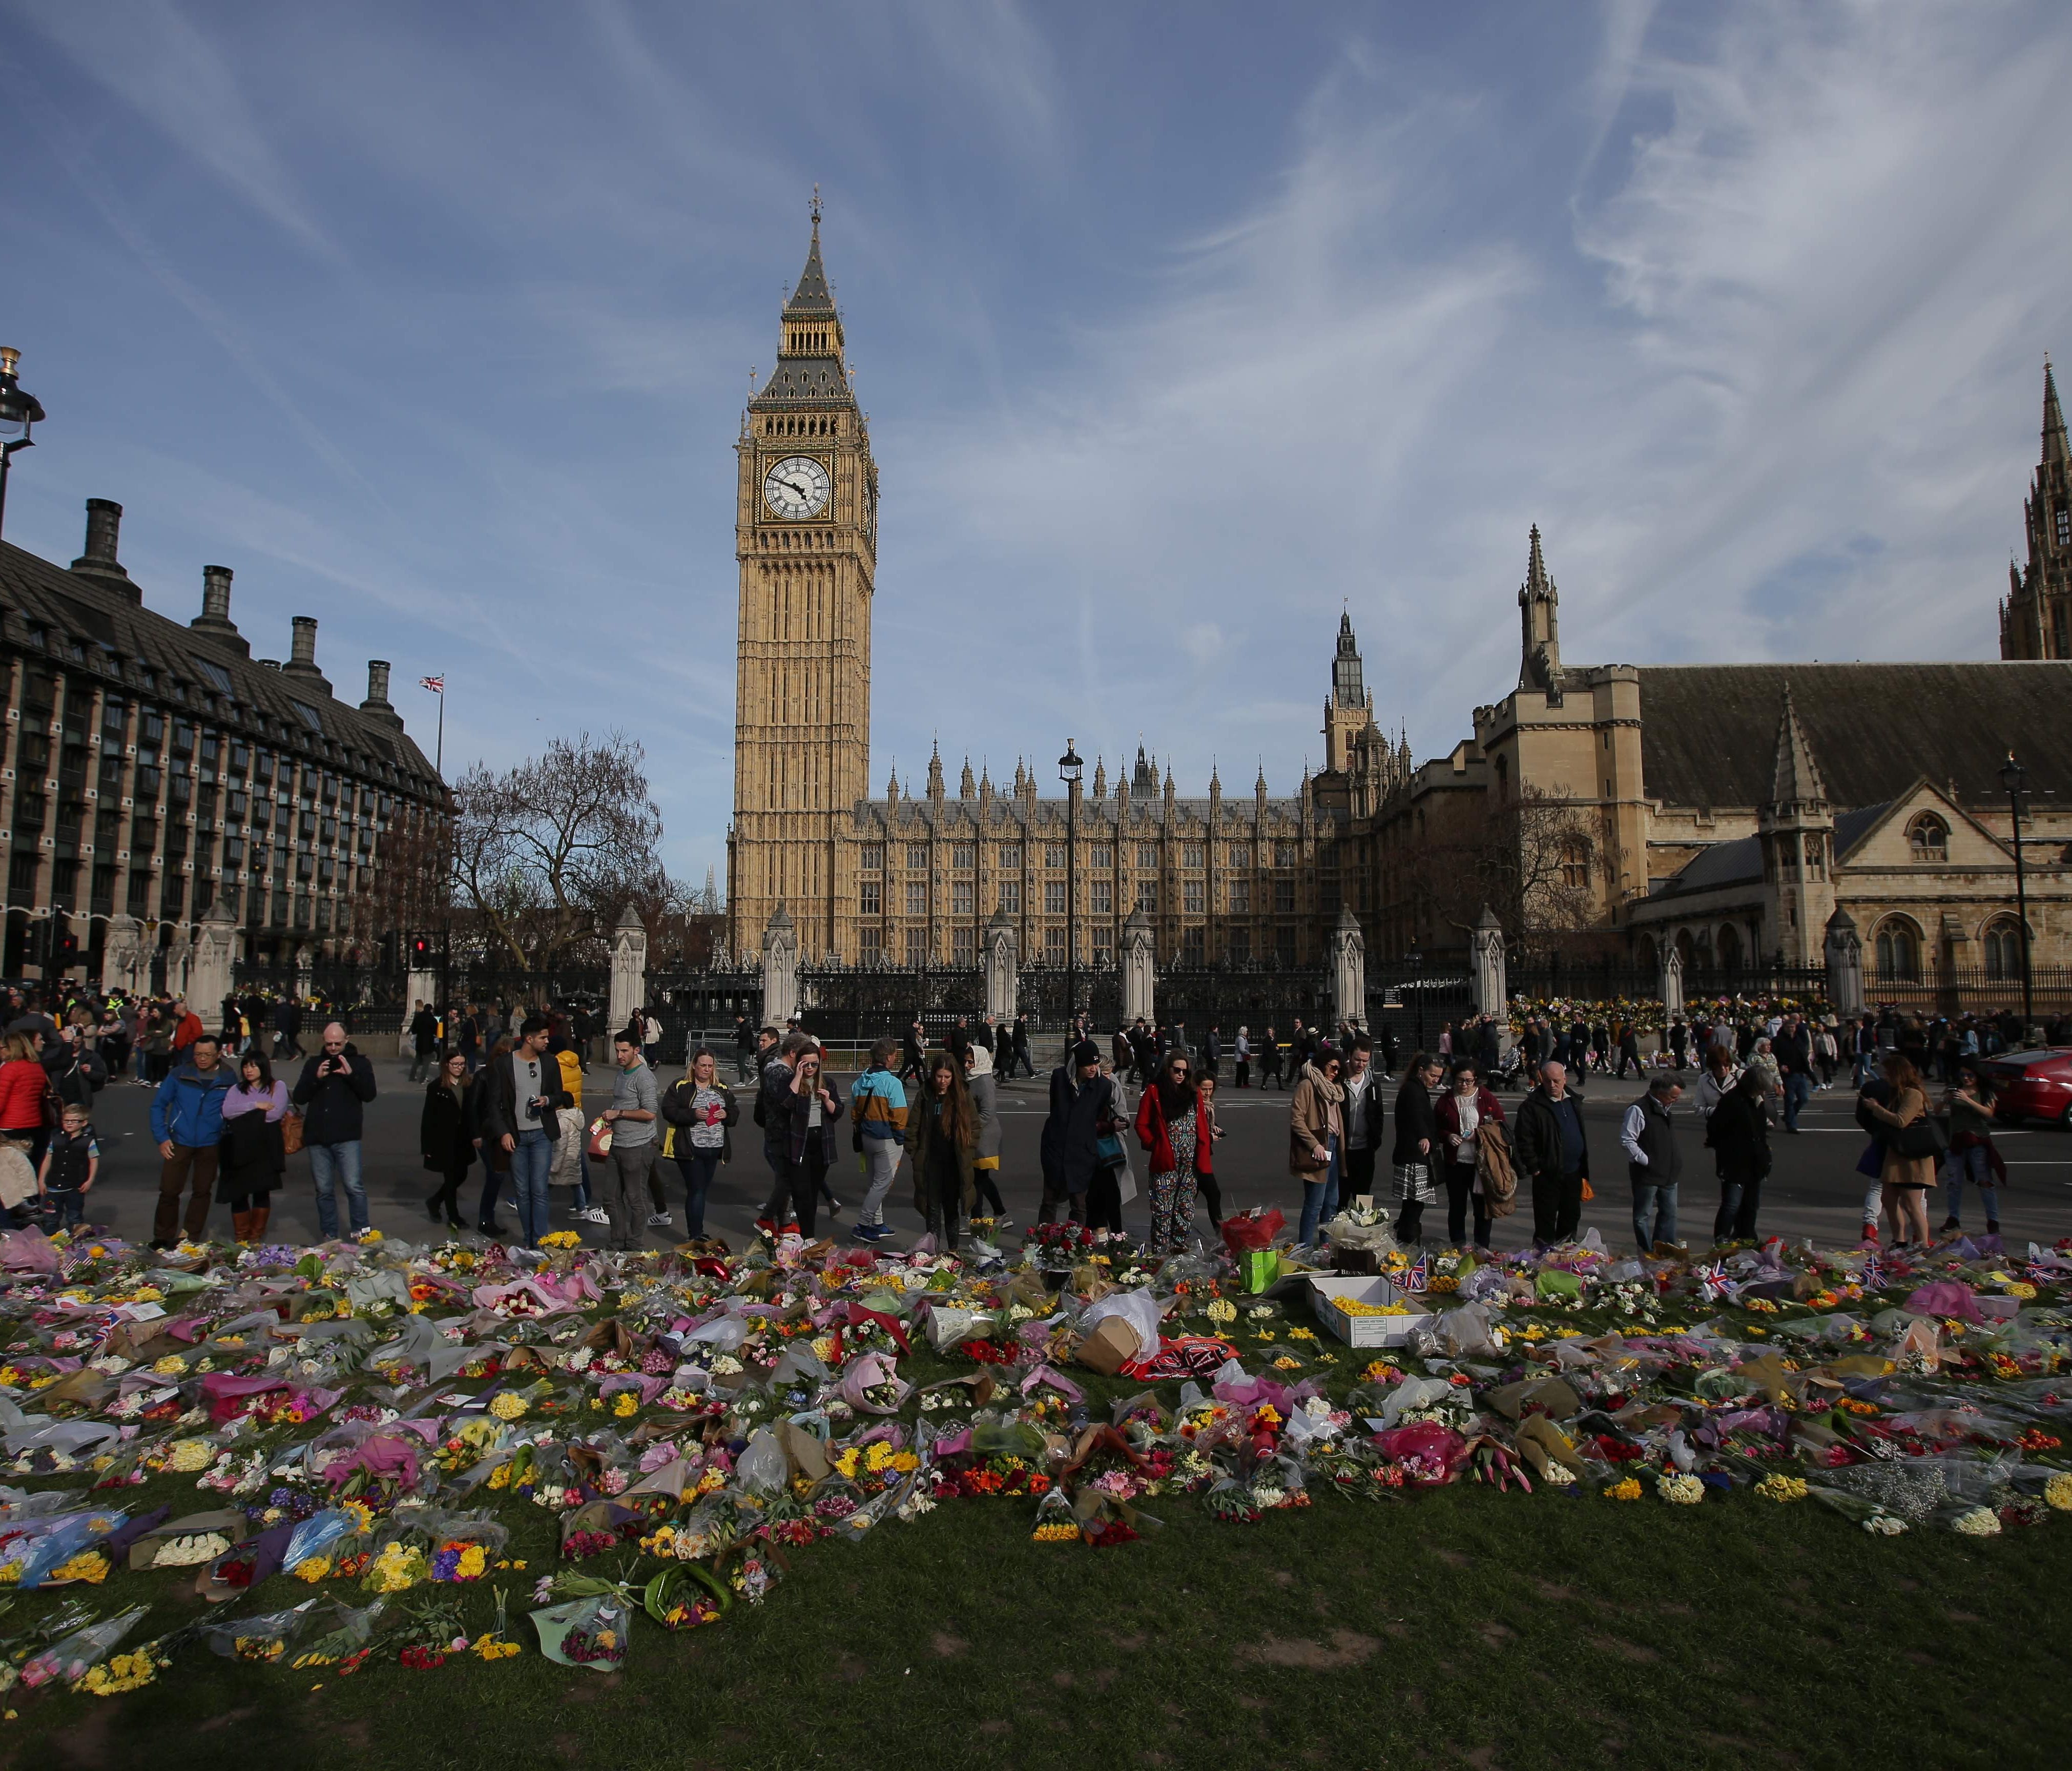 Floral tributes to the victims of the March 22 terror attack are seen in Parliament Square in central London on March 26, 2017.  British police investigating the terror attack on parliament made a new arrest on March 26 as authorities try to piece tog